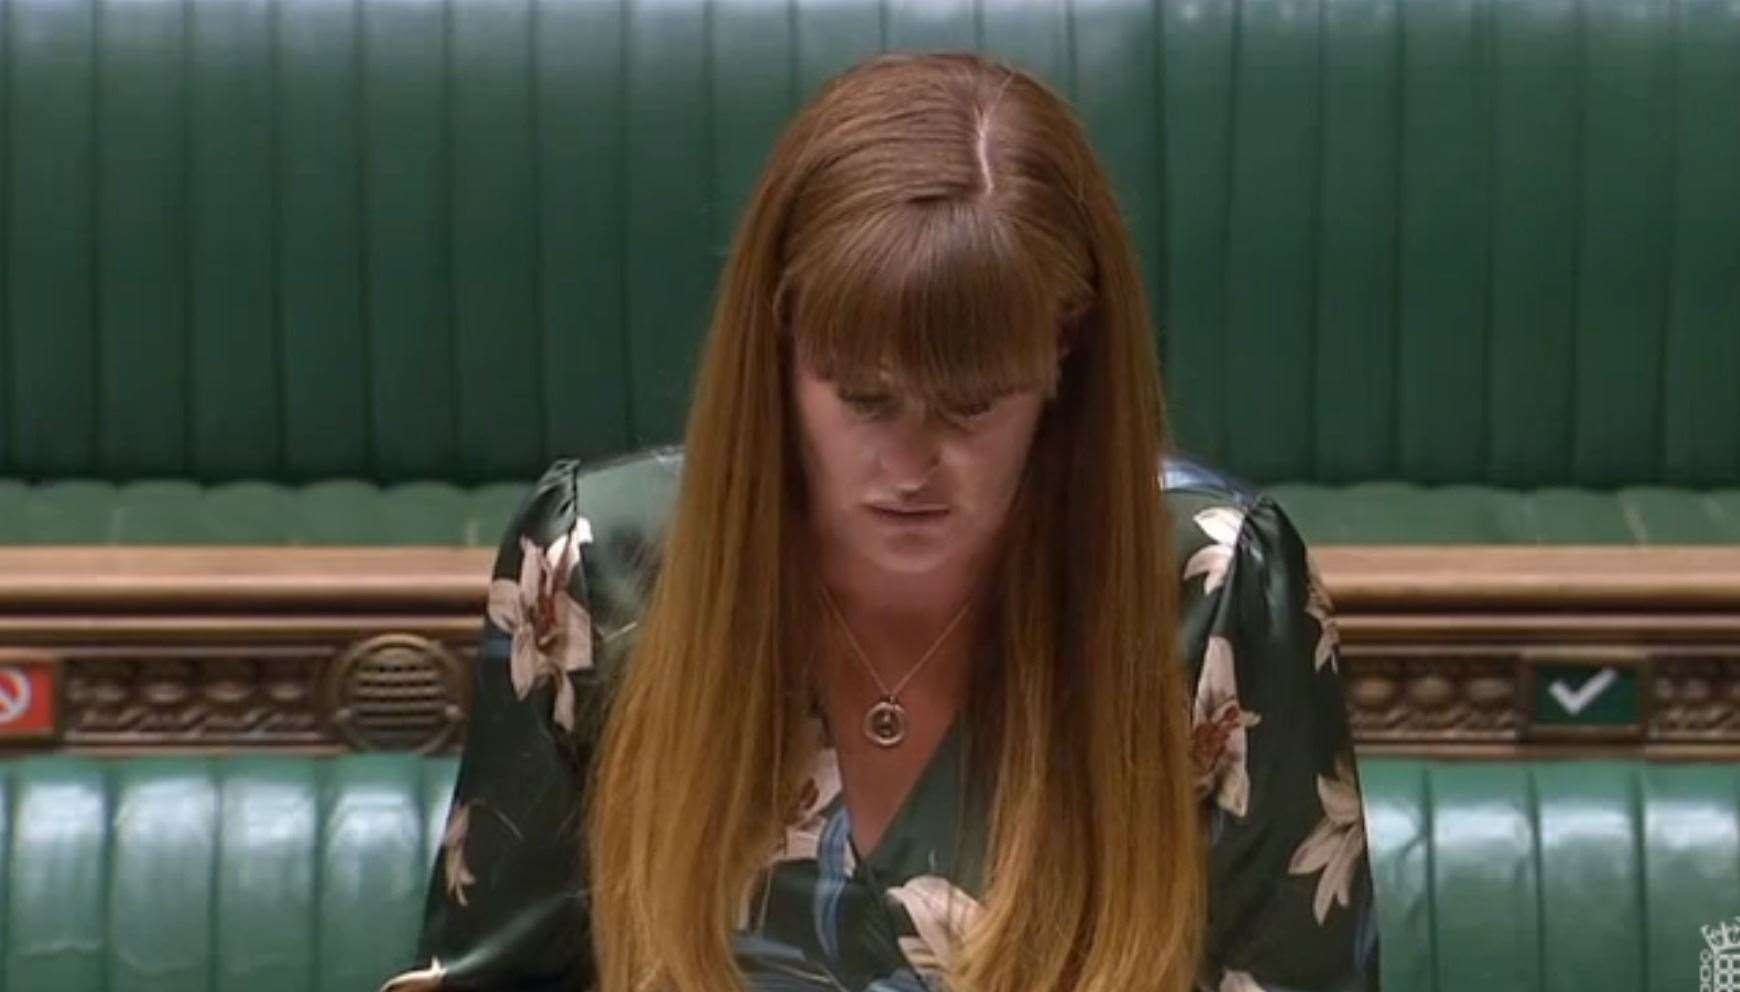 Aviation Minister Kelly Tolhurst says she has been talkign with airlines and airports to find ways to prevent job losses Photo: Parliament TV